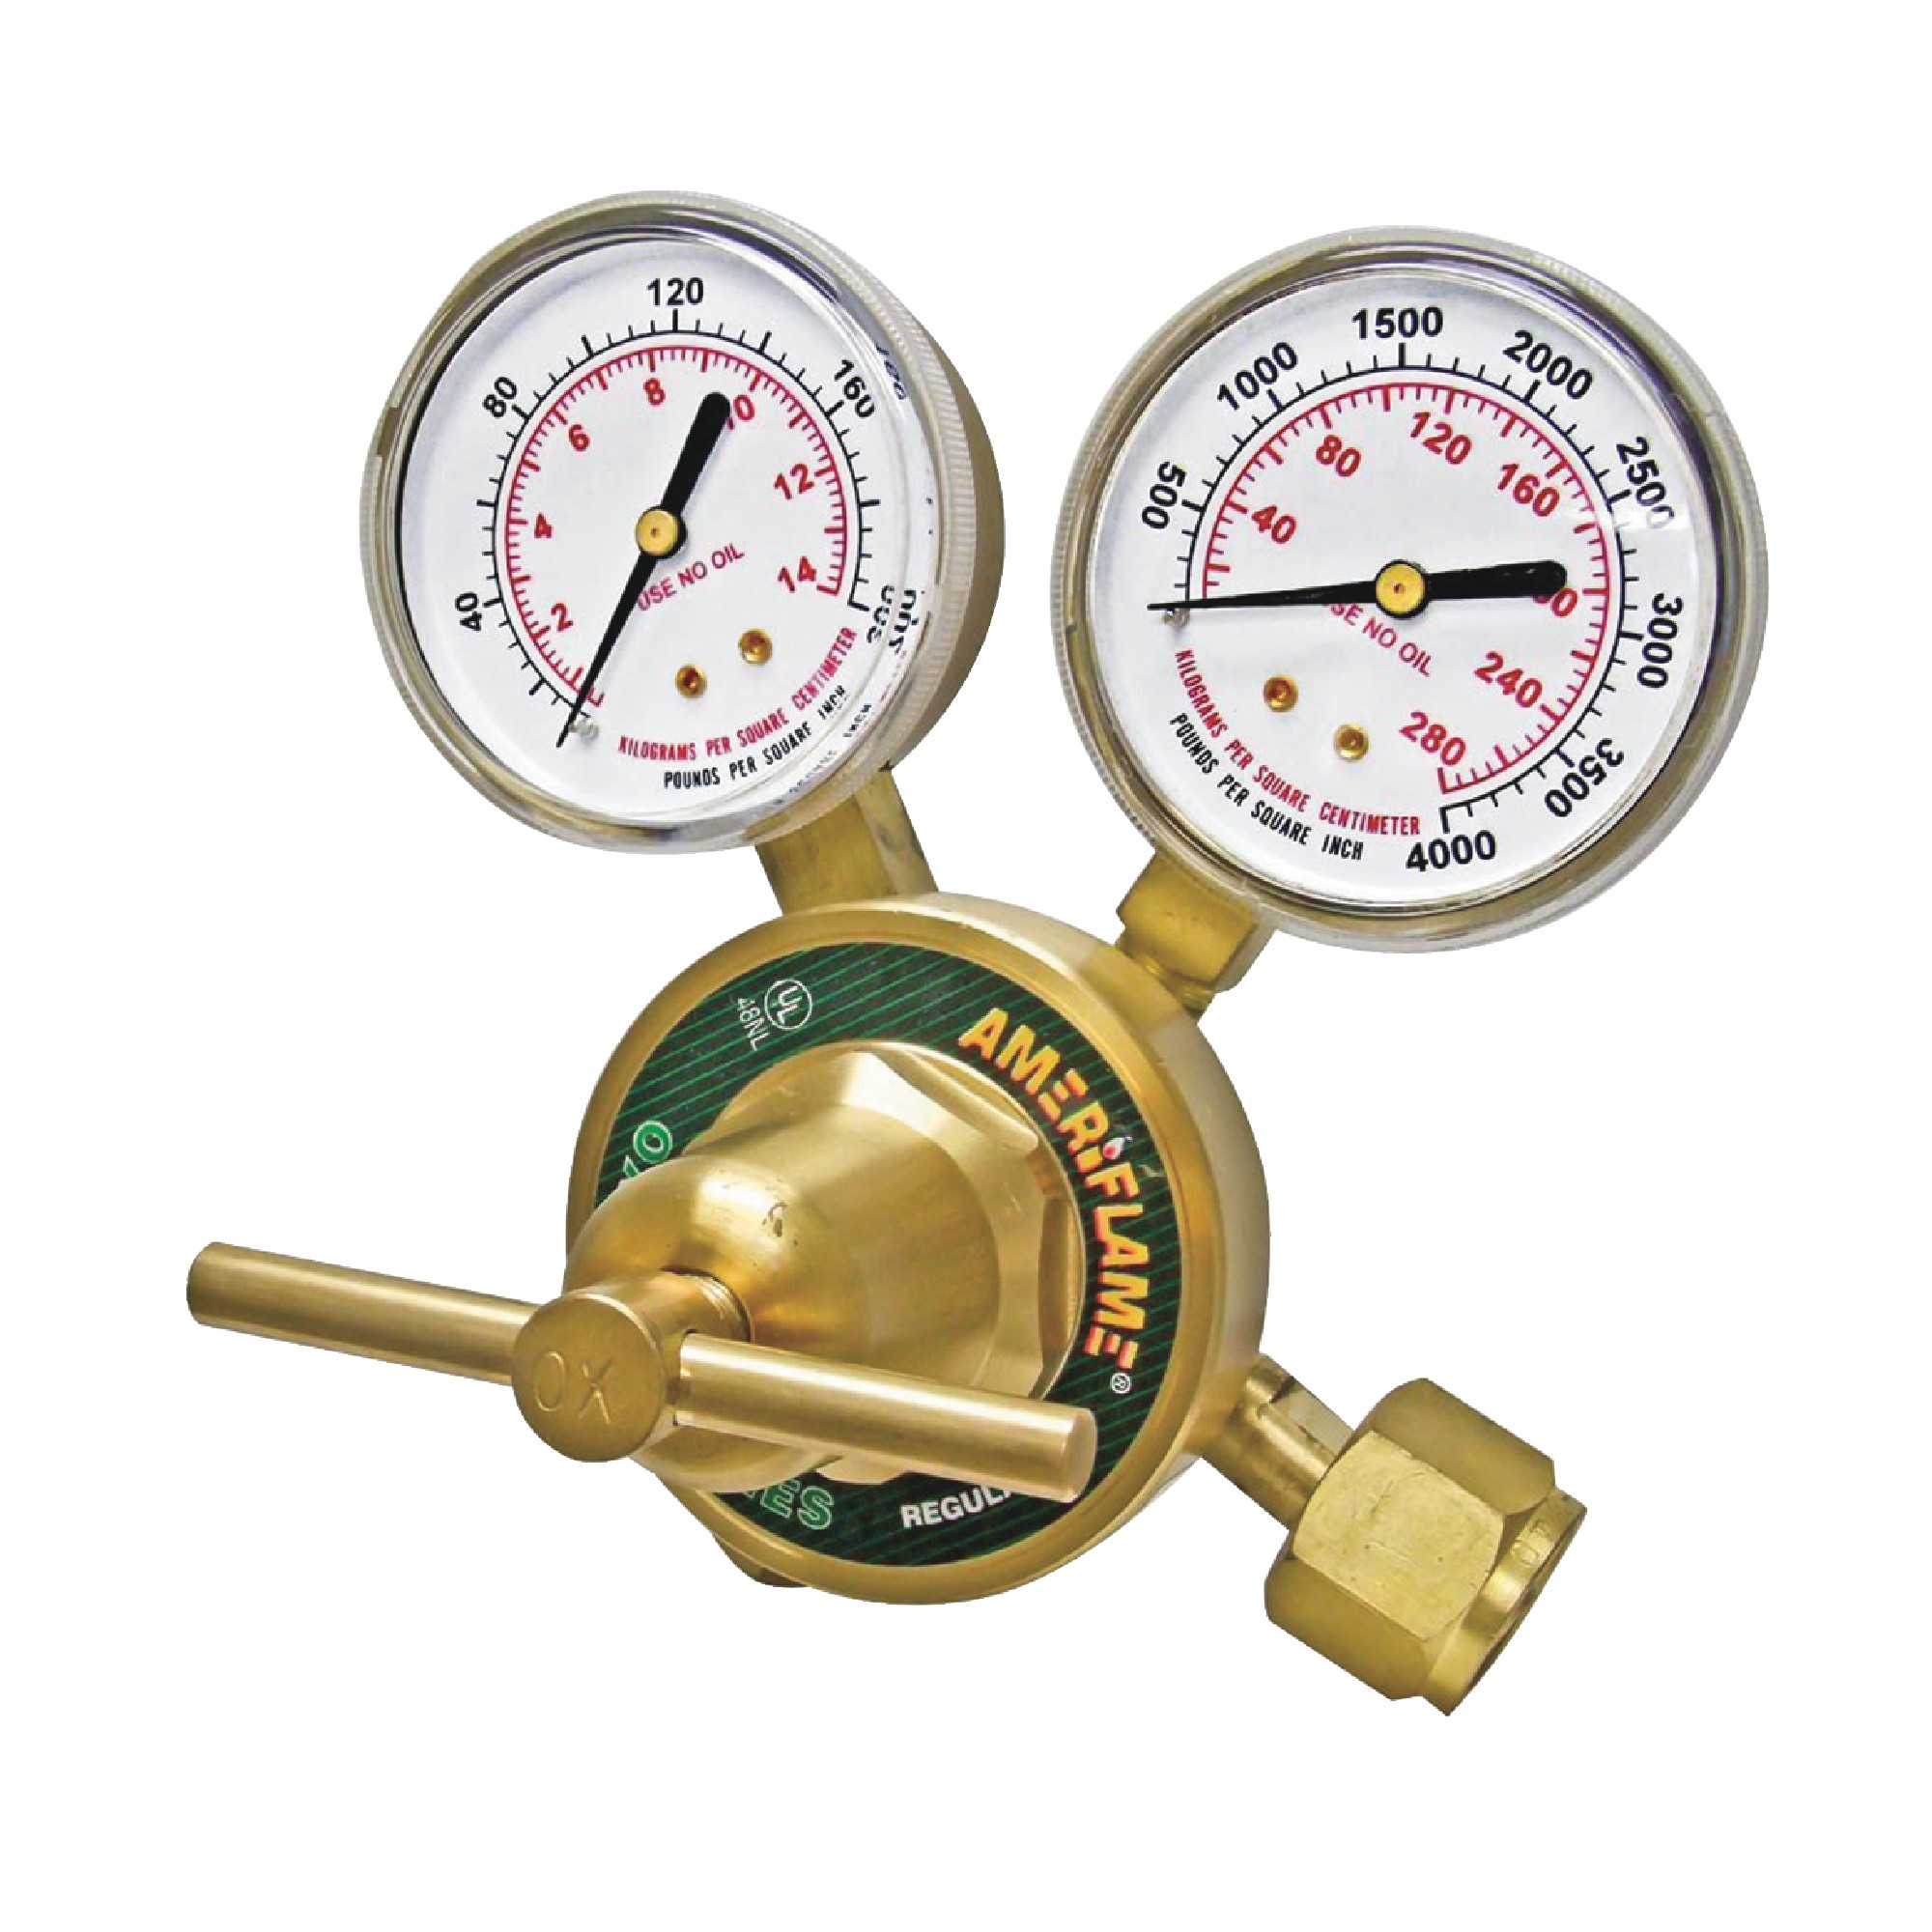 Heavy Duty Single Stage Oxygen Regulator With 2-1/2" Dual Scale Gauges